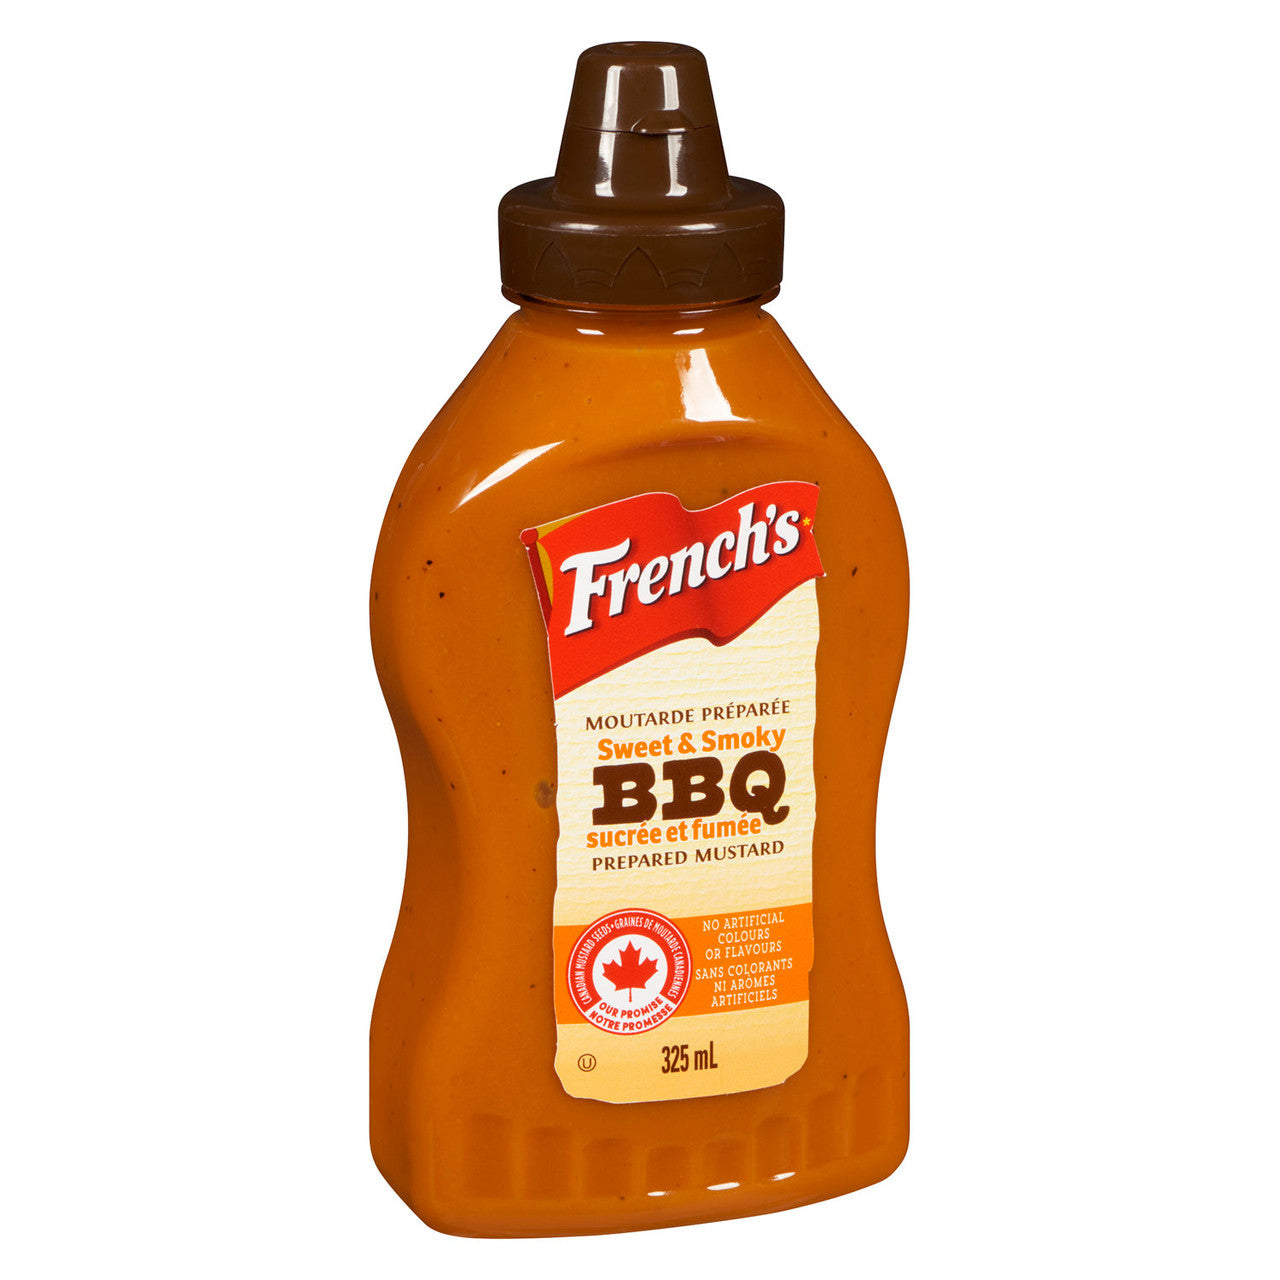 French's Sweet & Smoky BBQ Prepared Mustard, 325ml/11 fl. oz., {Imported from Canada}